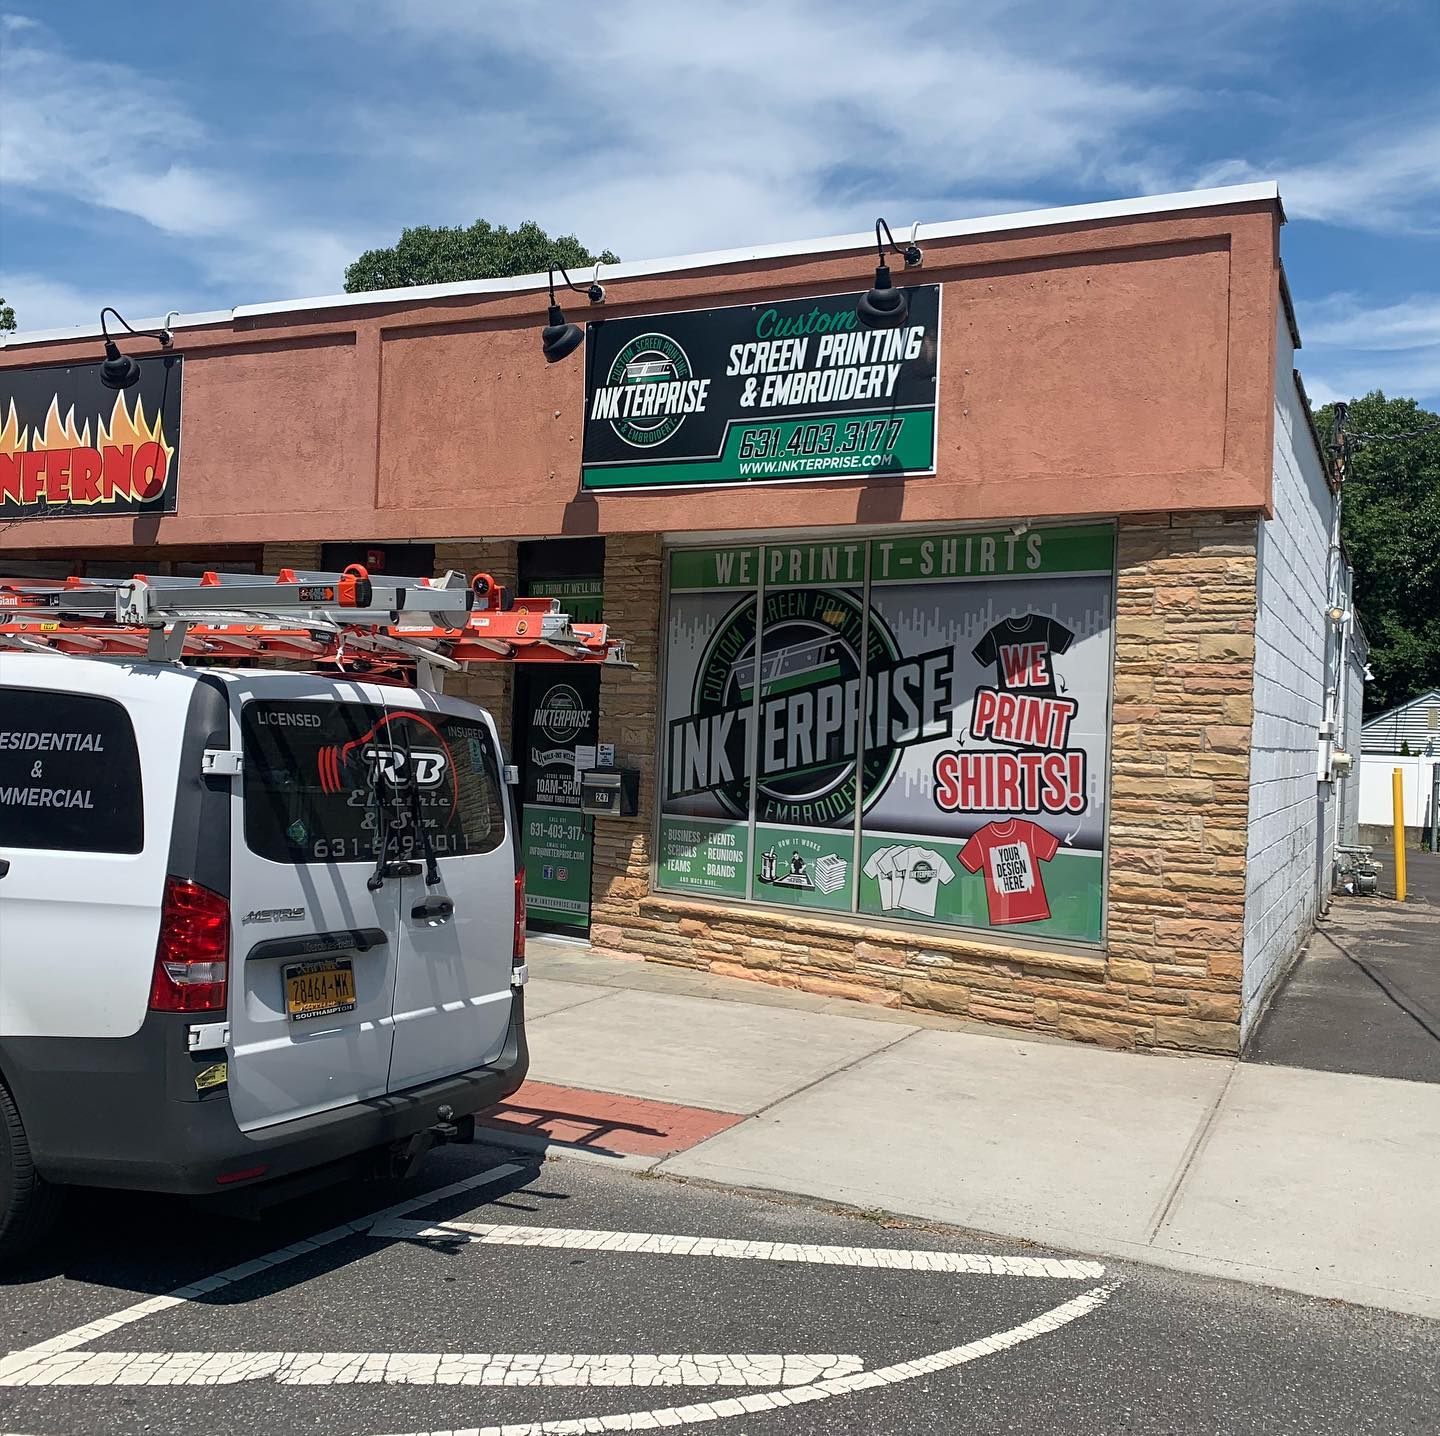 RB AND SON ELECTRIC - Best Electricians Suffolk County, Commercial, Residential Electrical, Exterior, Interior Services 678 N Country Rd #12, Rocky Point New York 11778